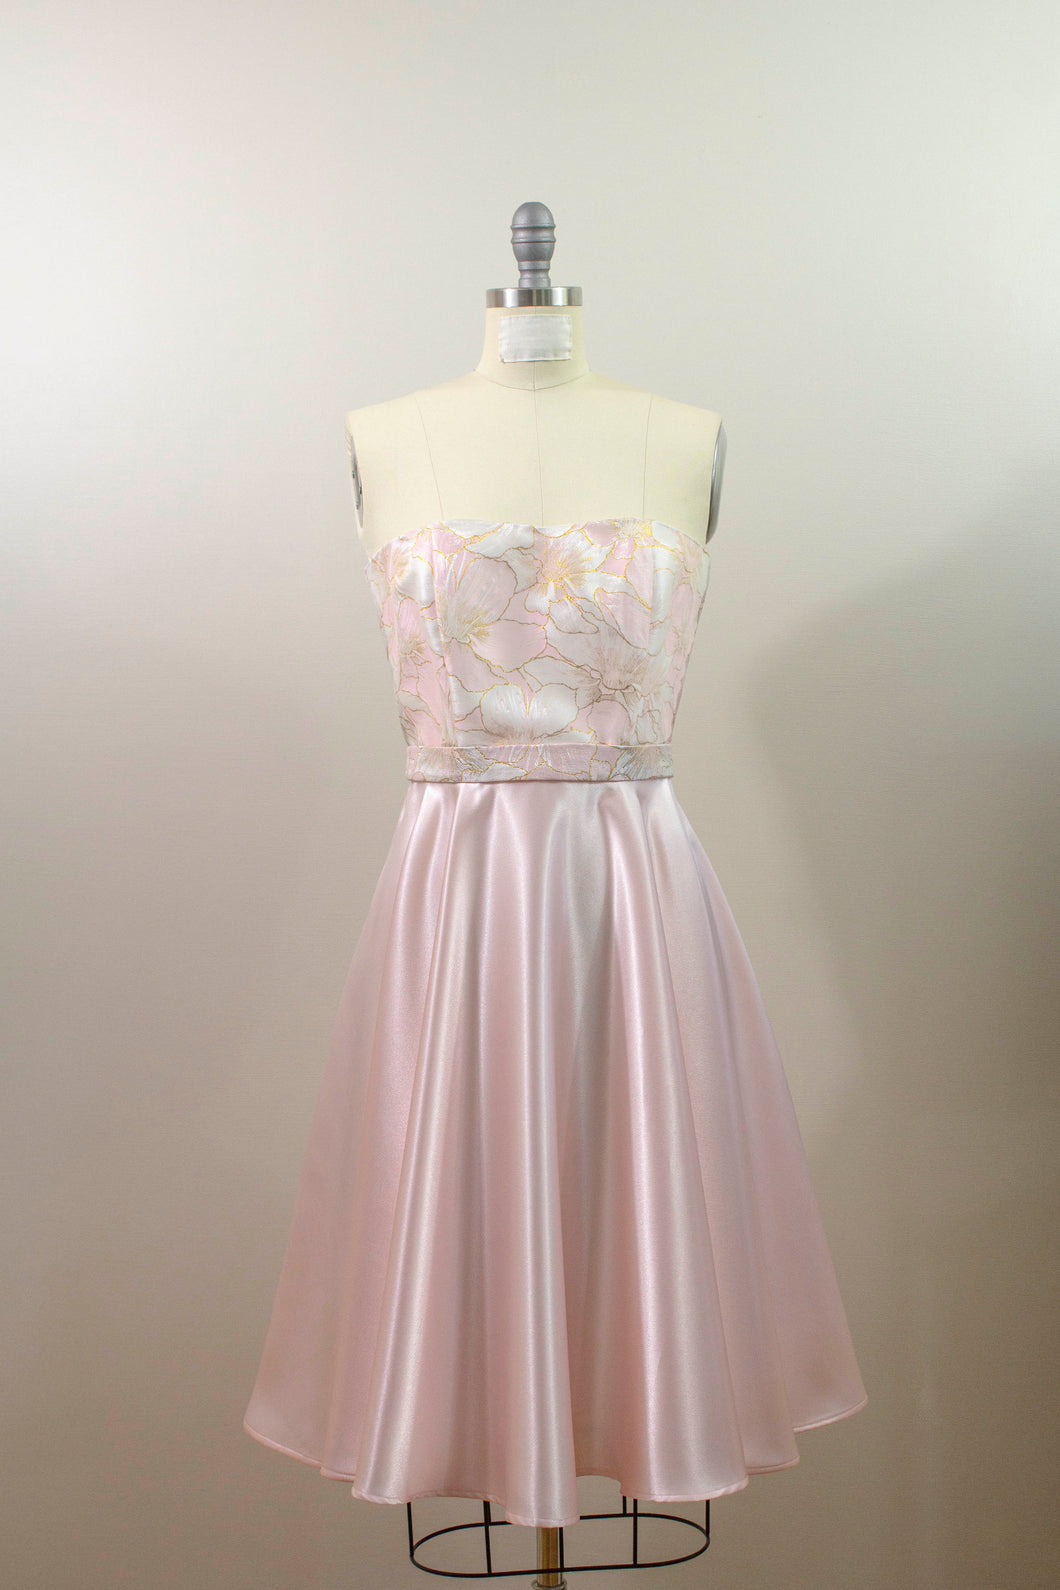 Denise pale pink floral brocade and satin